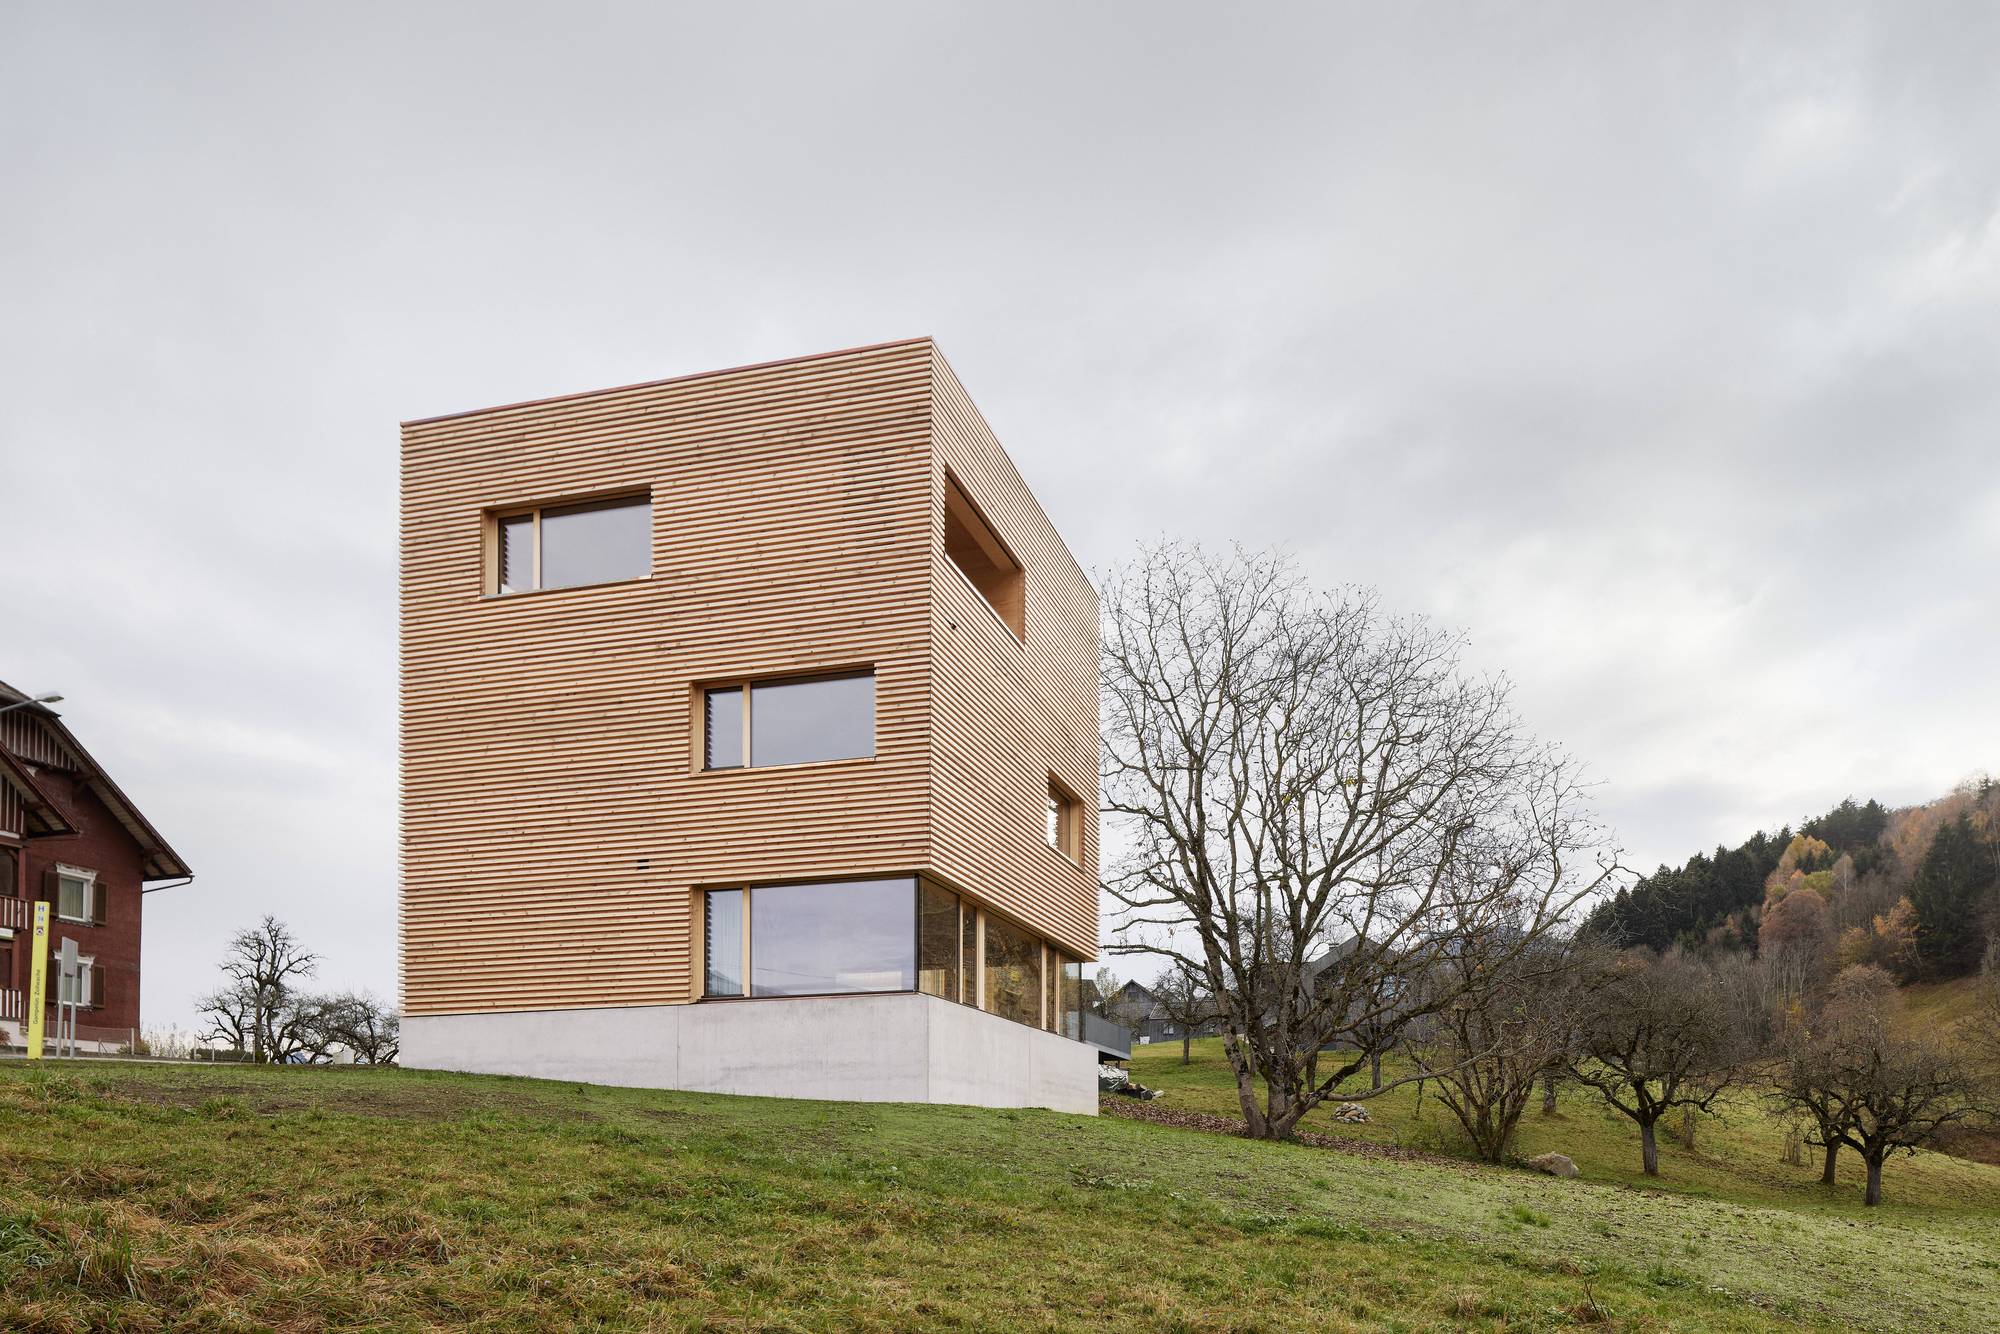 A Cube Home Was Built In Austria Utilizing Timber From The Owner's Private Forest